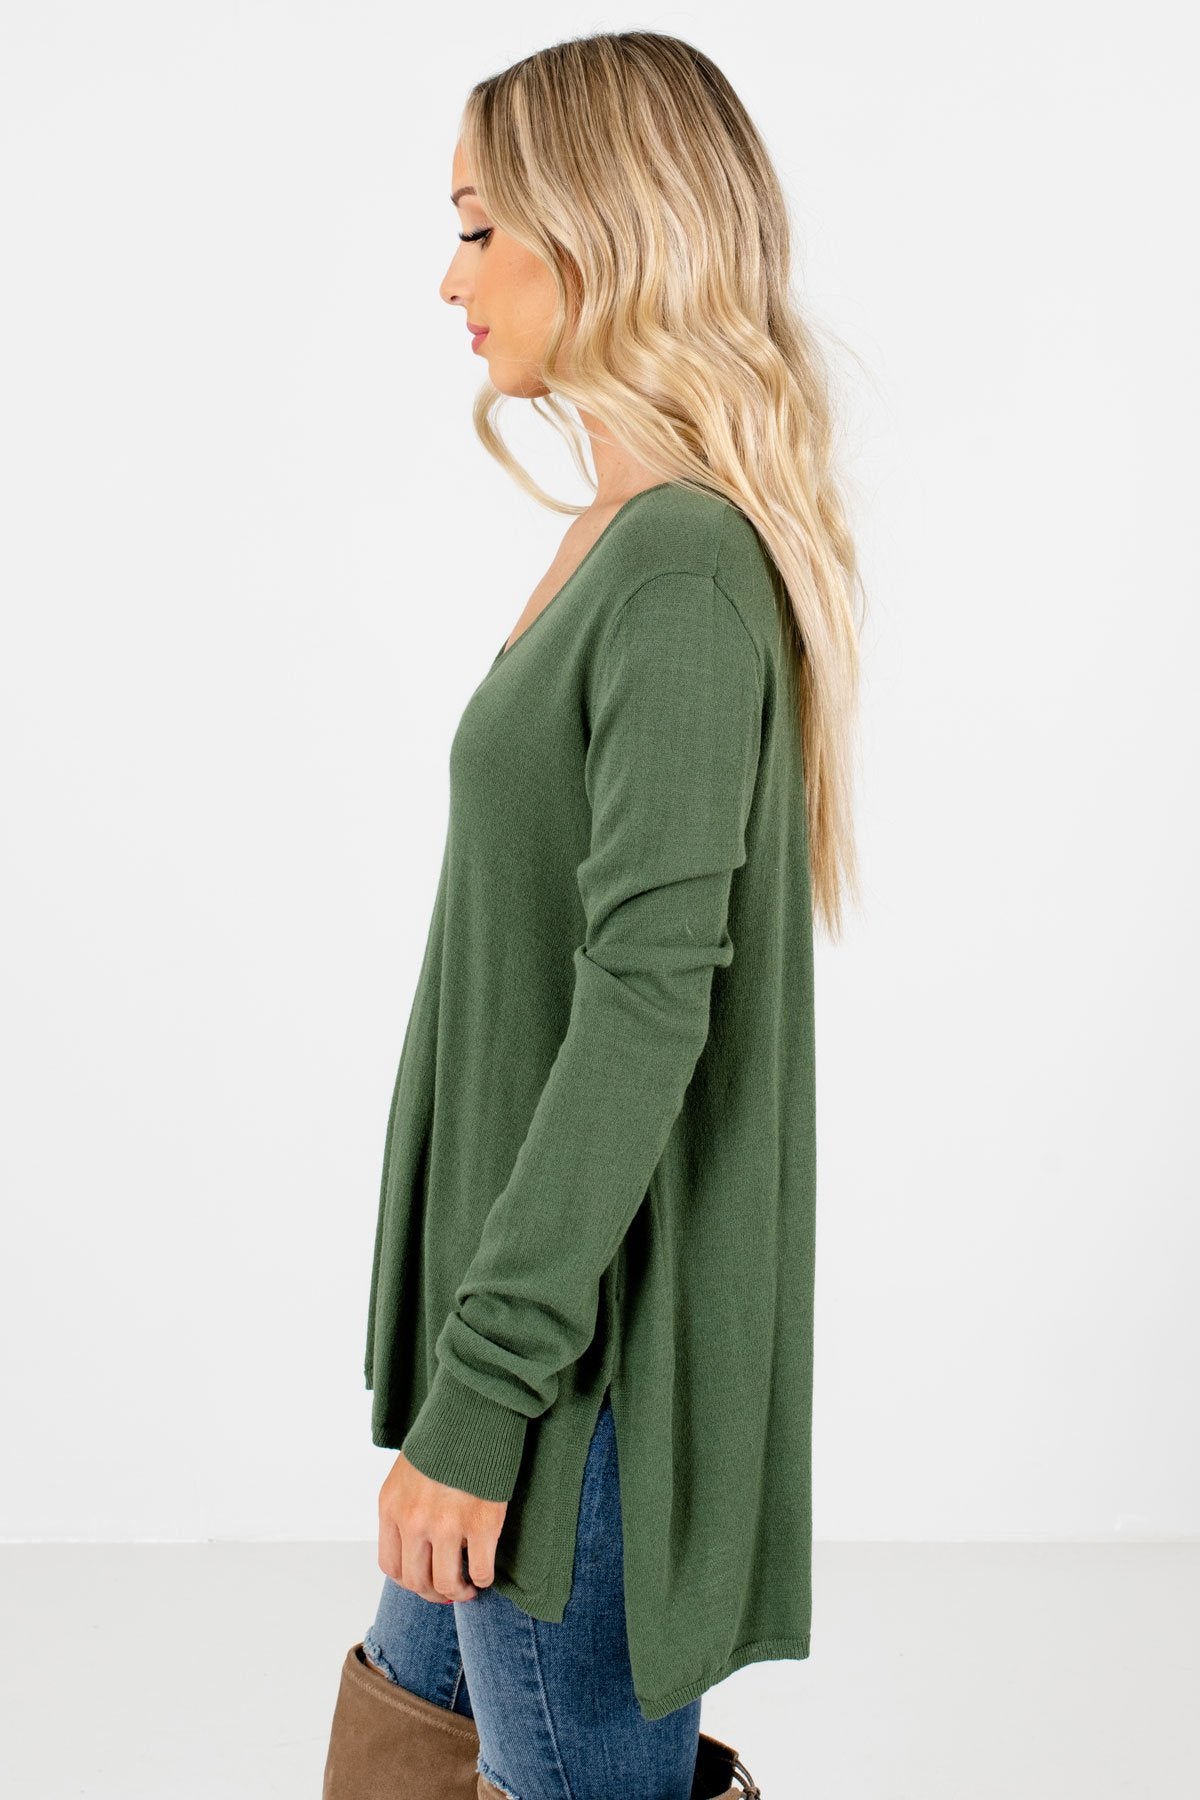 Olive Green V-Neckline Boutique Sweaters for Women